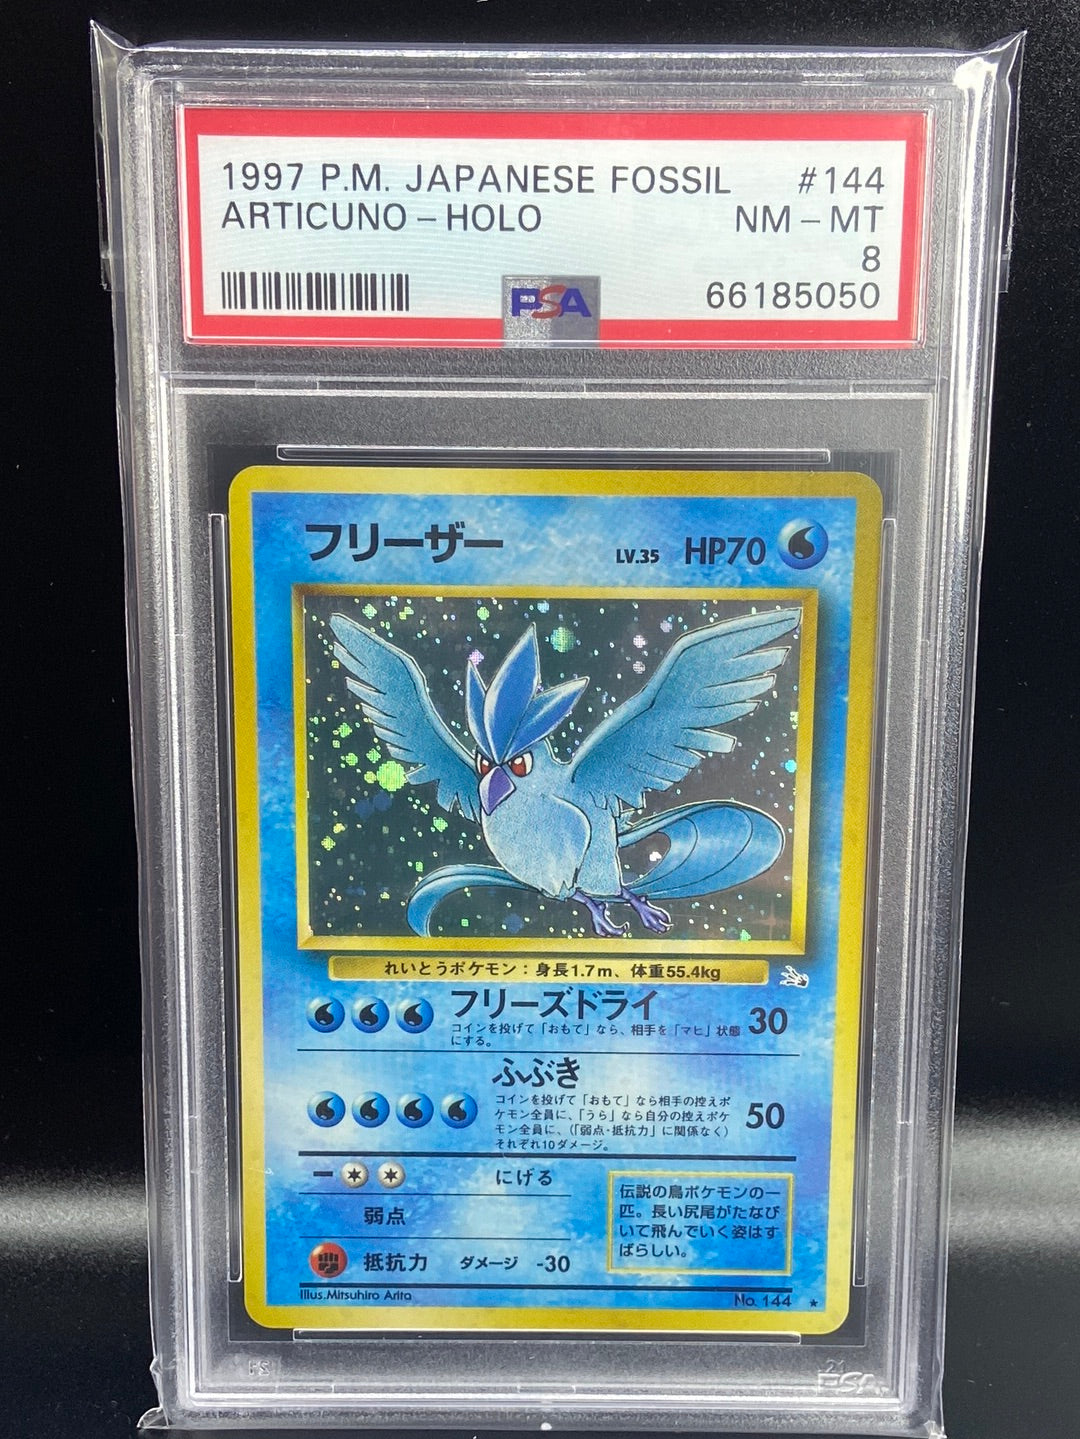 Articuno Fossil Holo #144 Japanese PSA 8